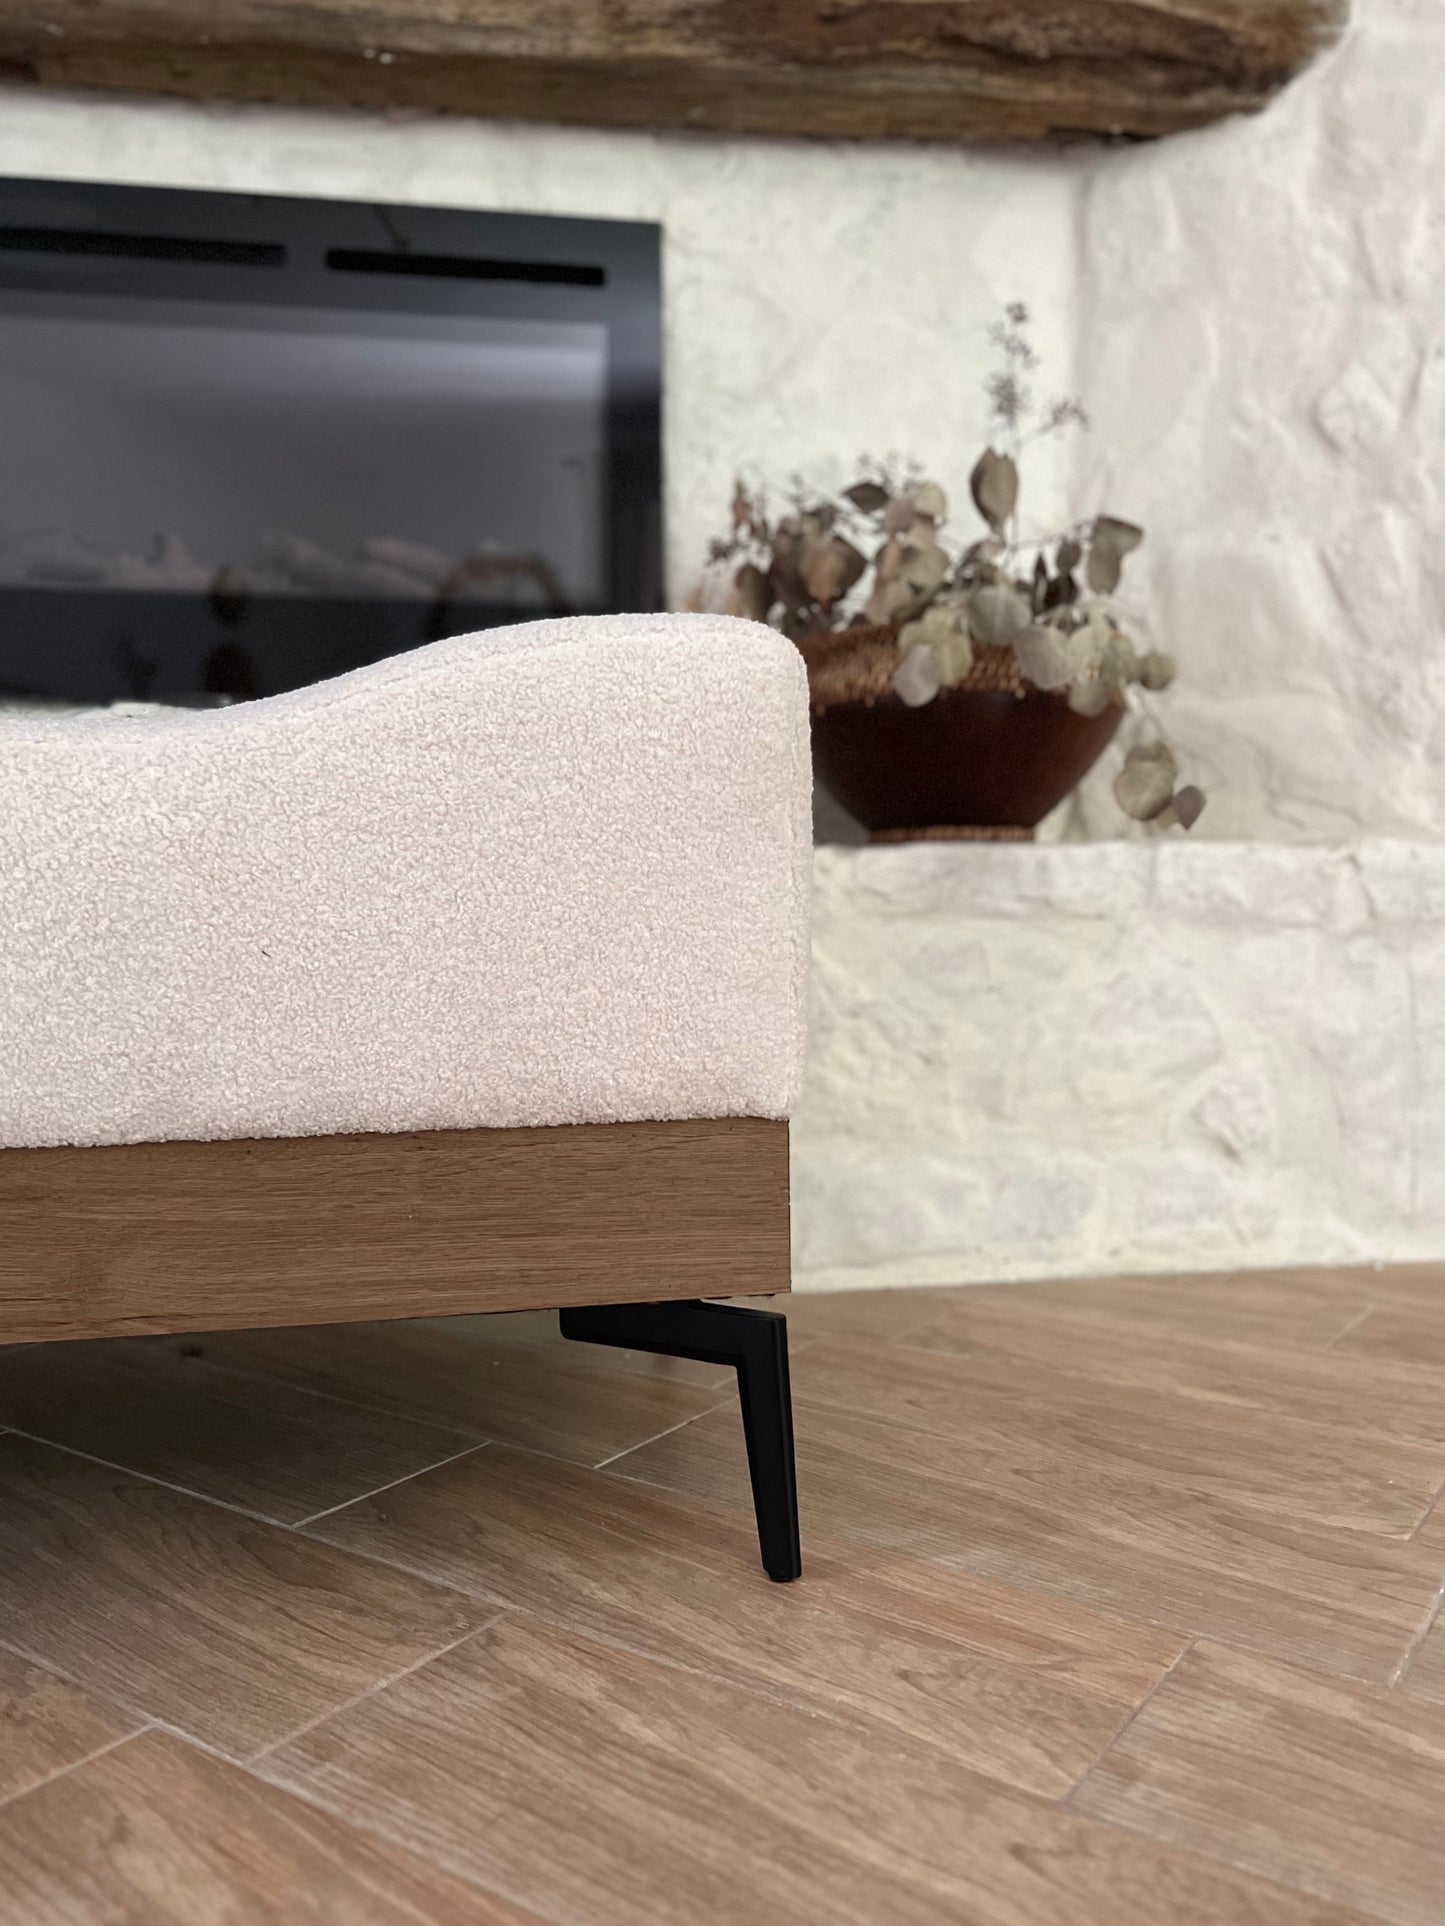 Kyma Bench with Wood